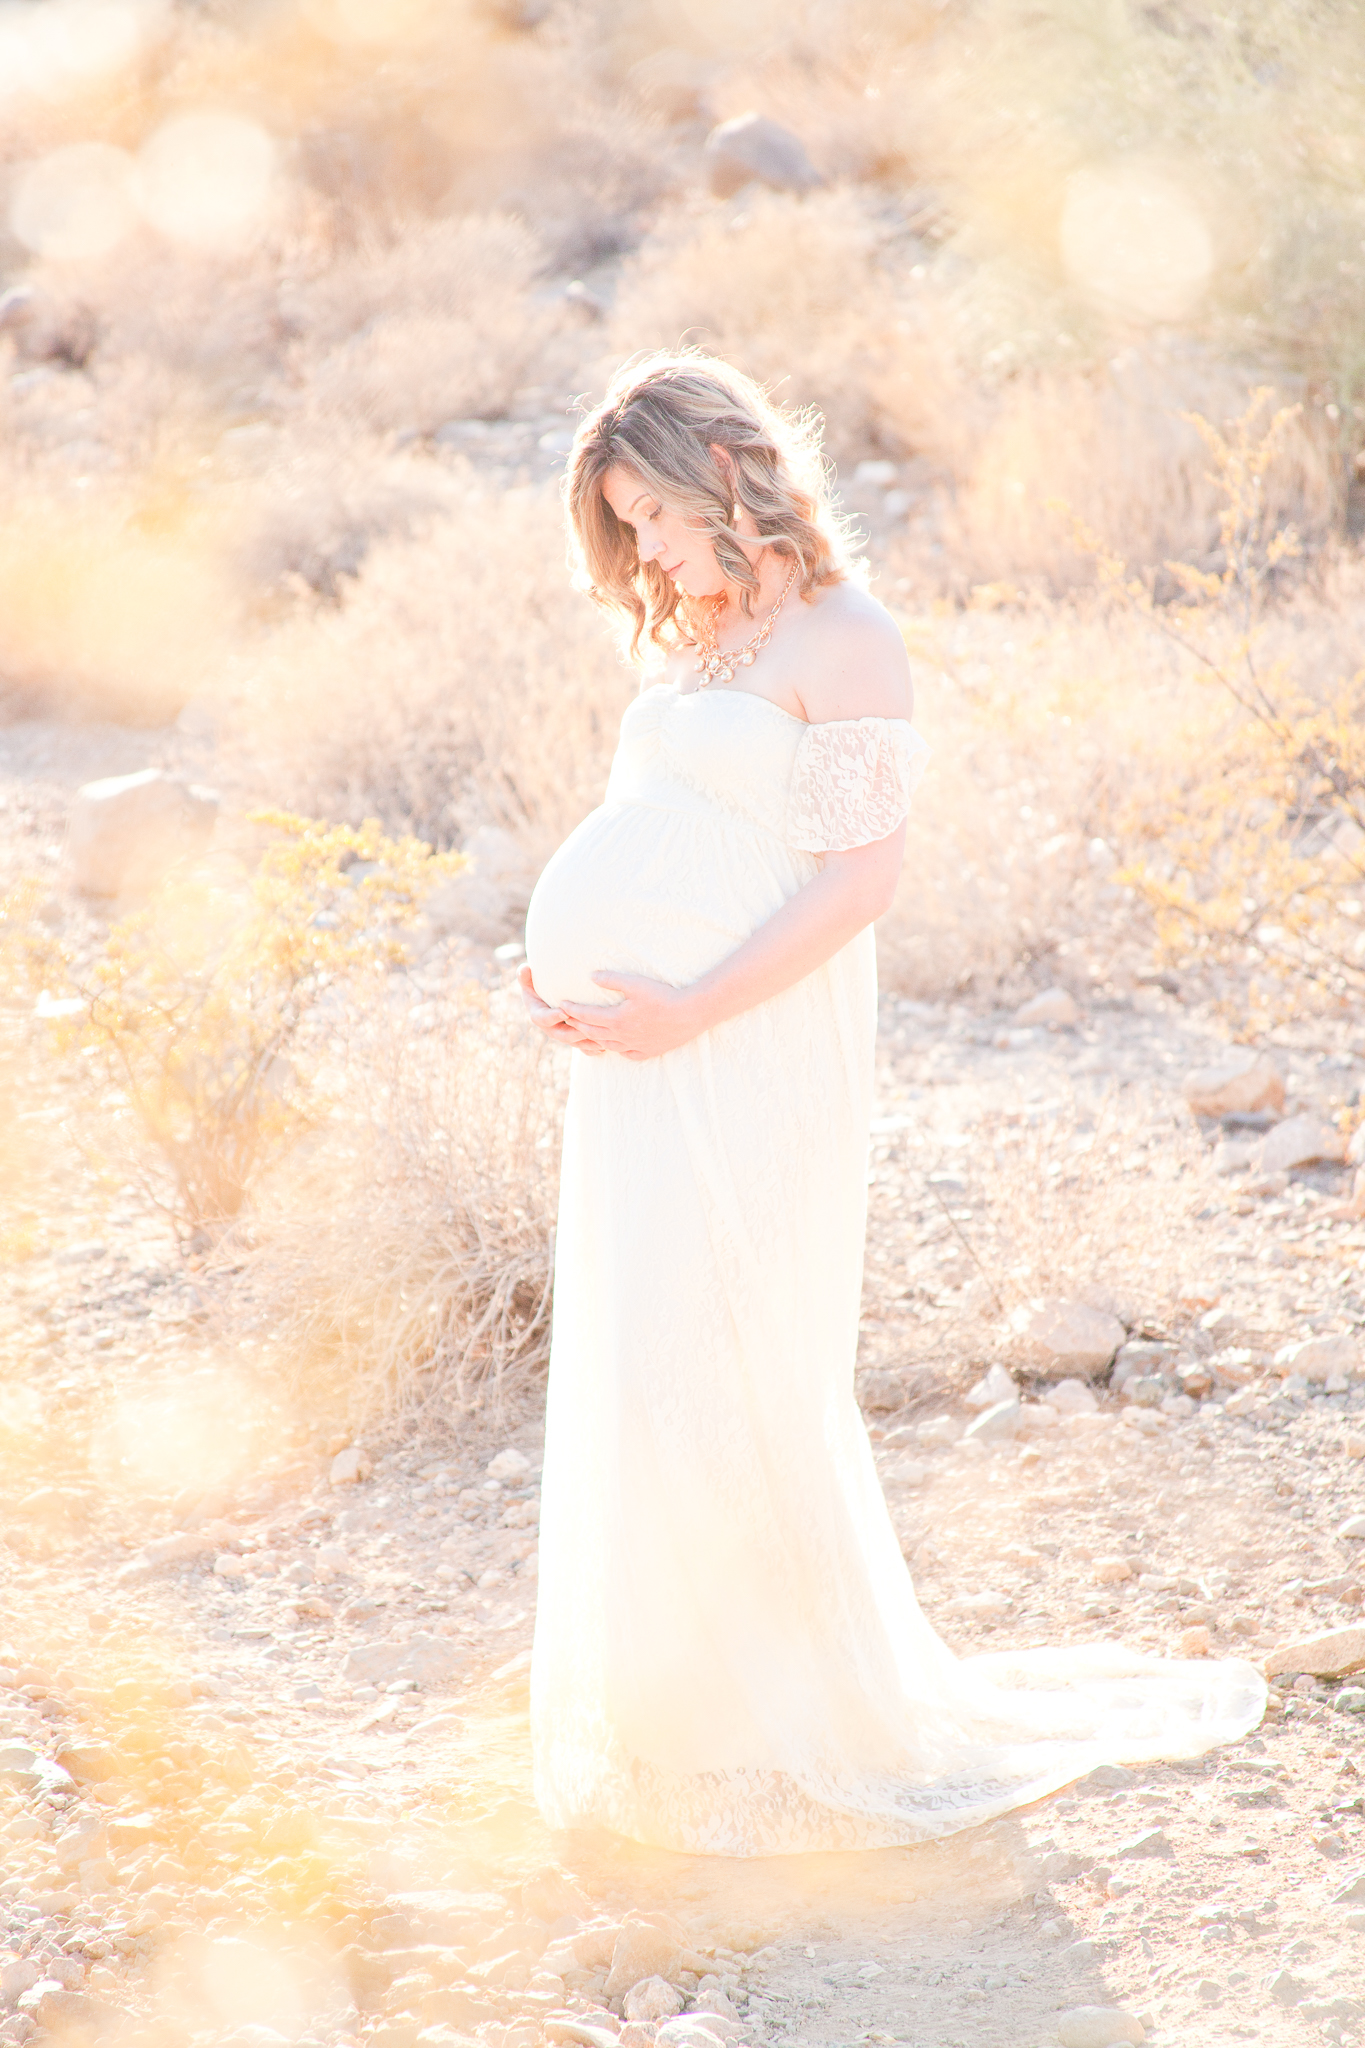 Caitlin Audrey Photography - A Desert Maternity Session